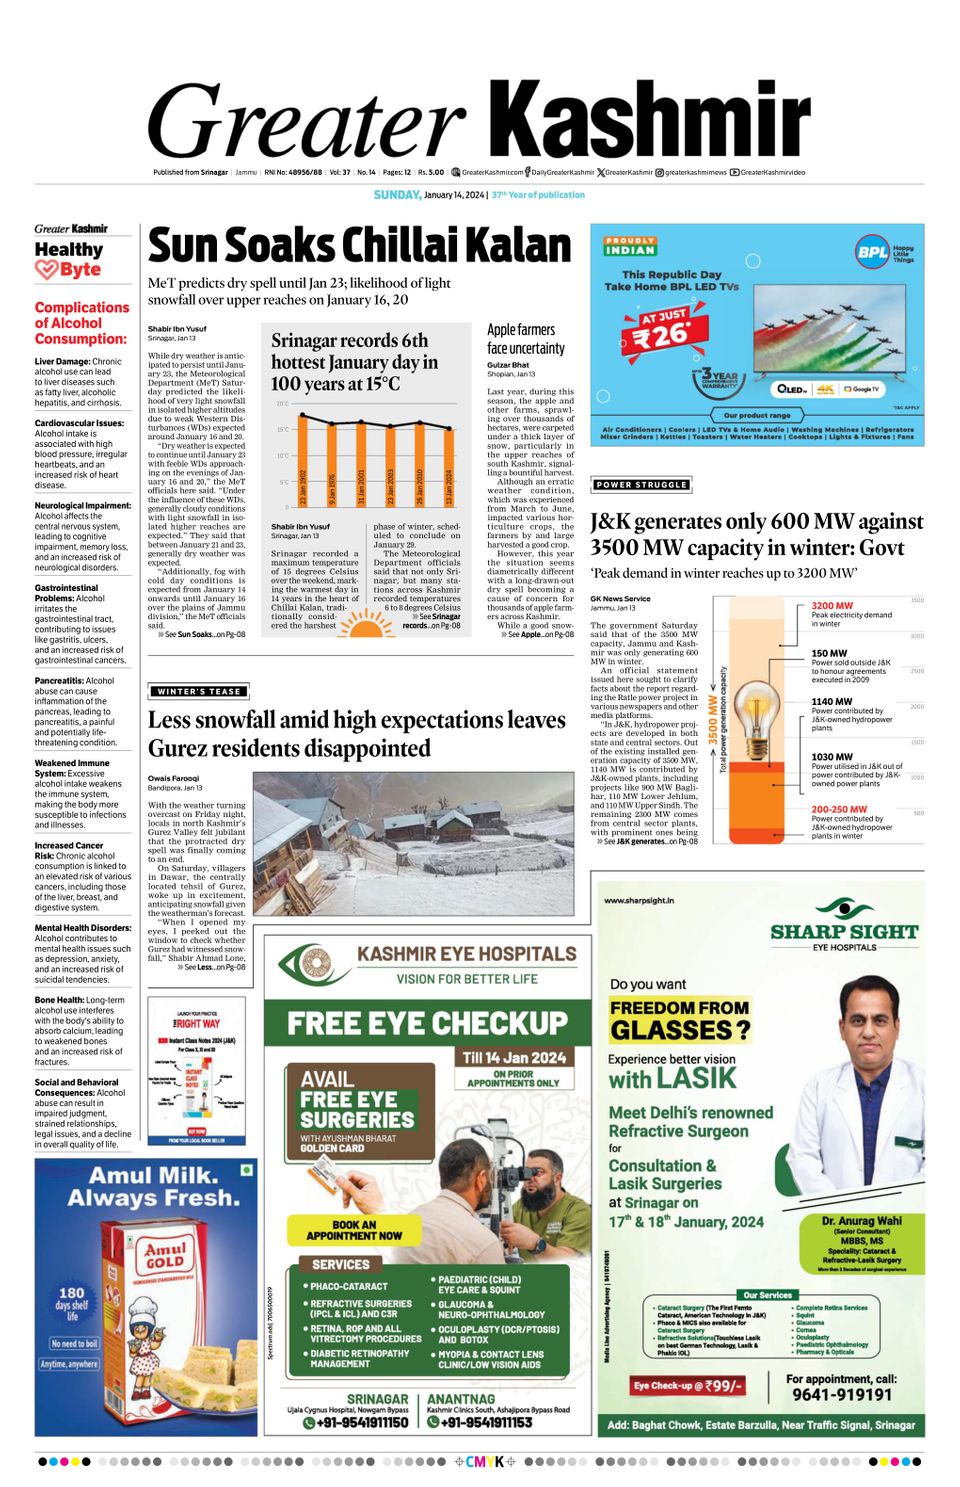 1302248 Greater Kashmir Cover 14 Jan 2024 Issue 